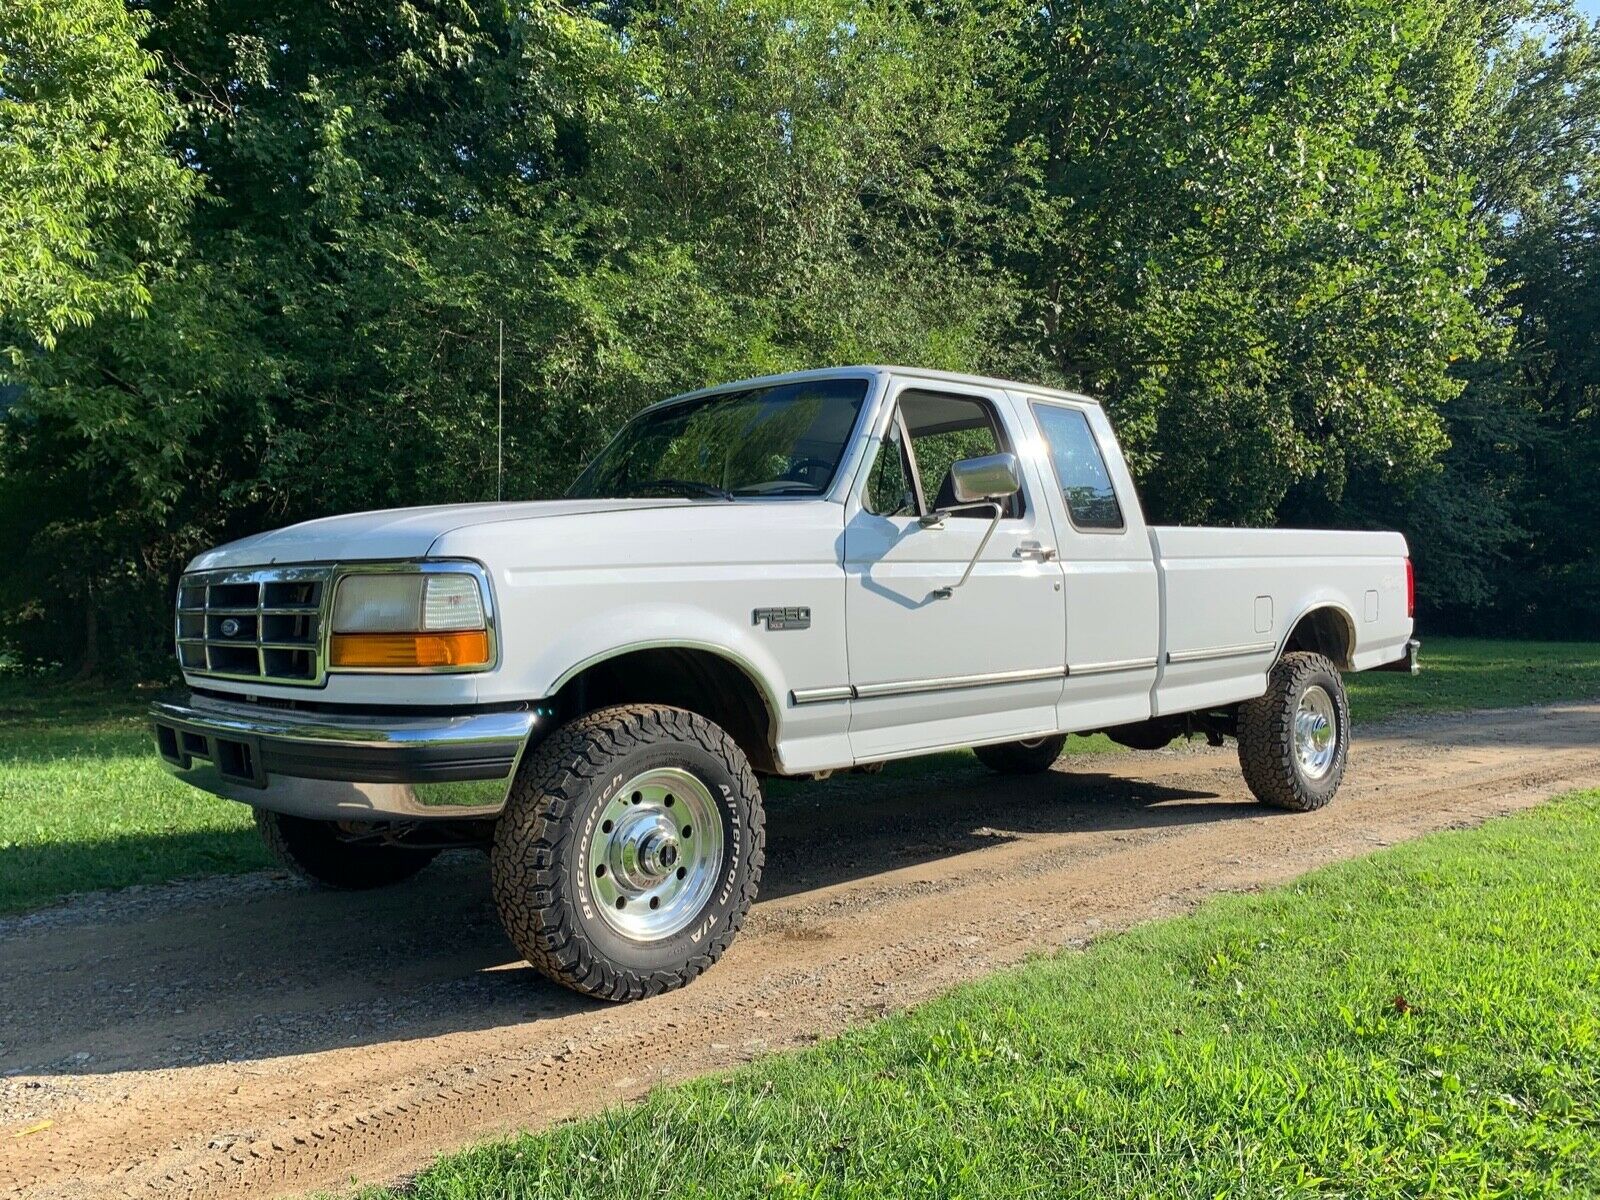 1996 Ford F-250 Xlt 1996 Ford F-250 Xlt 4x4 Extended Cab Auto. Southern Truck.